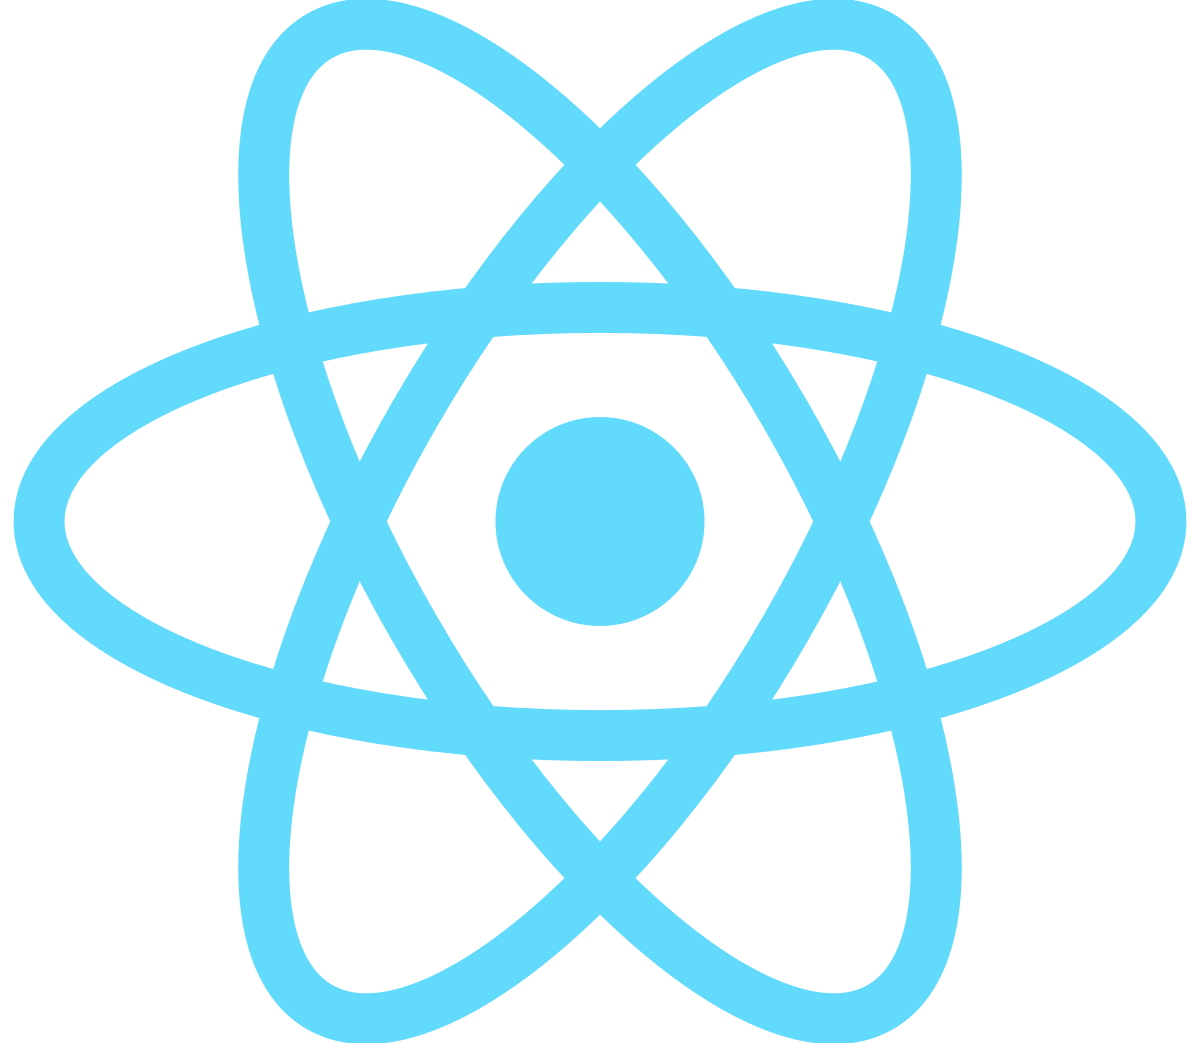 React Native Developers in 2022: an overview